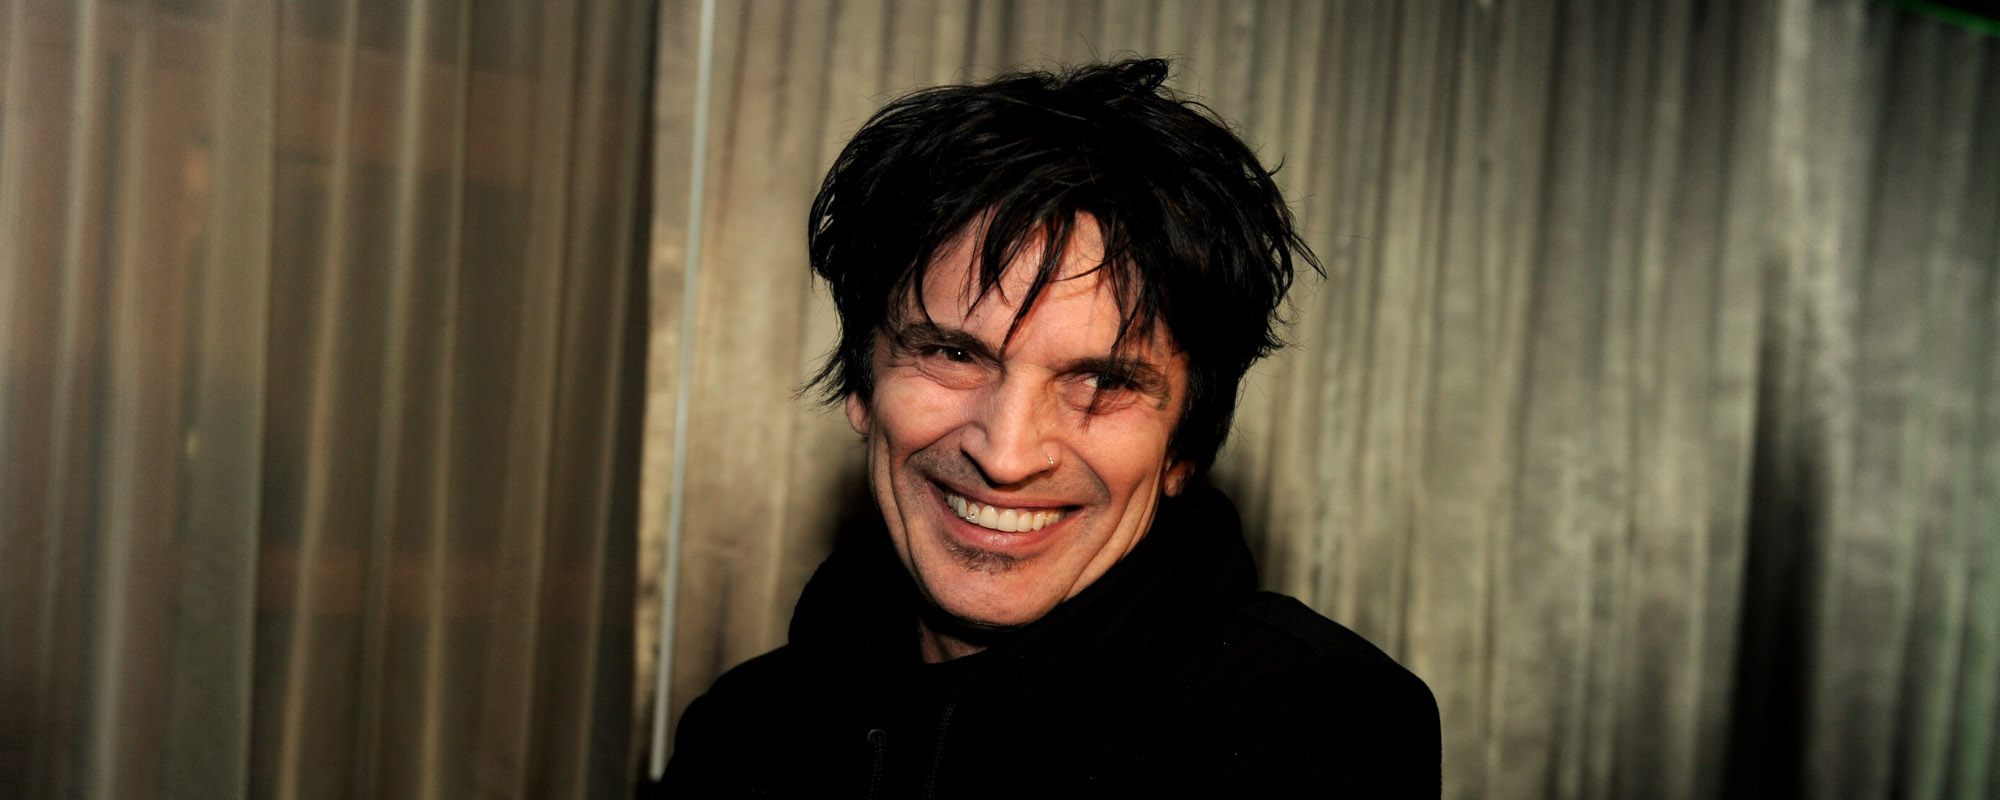 5 Fascinating Facts About Tommy Lee